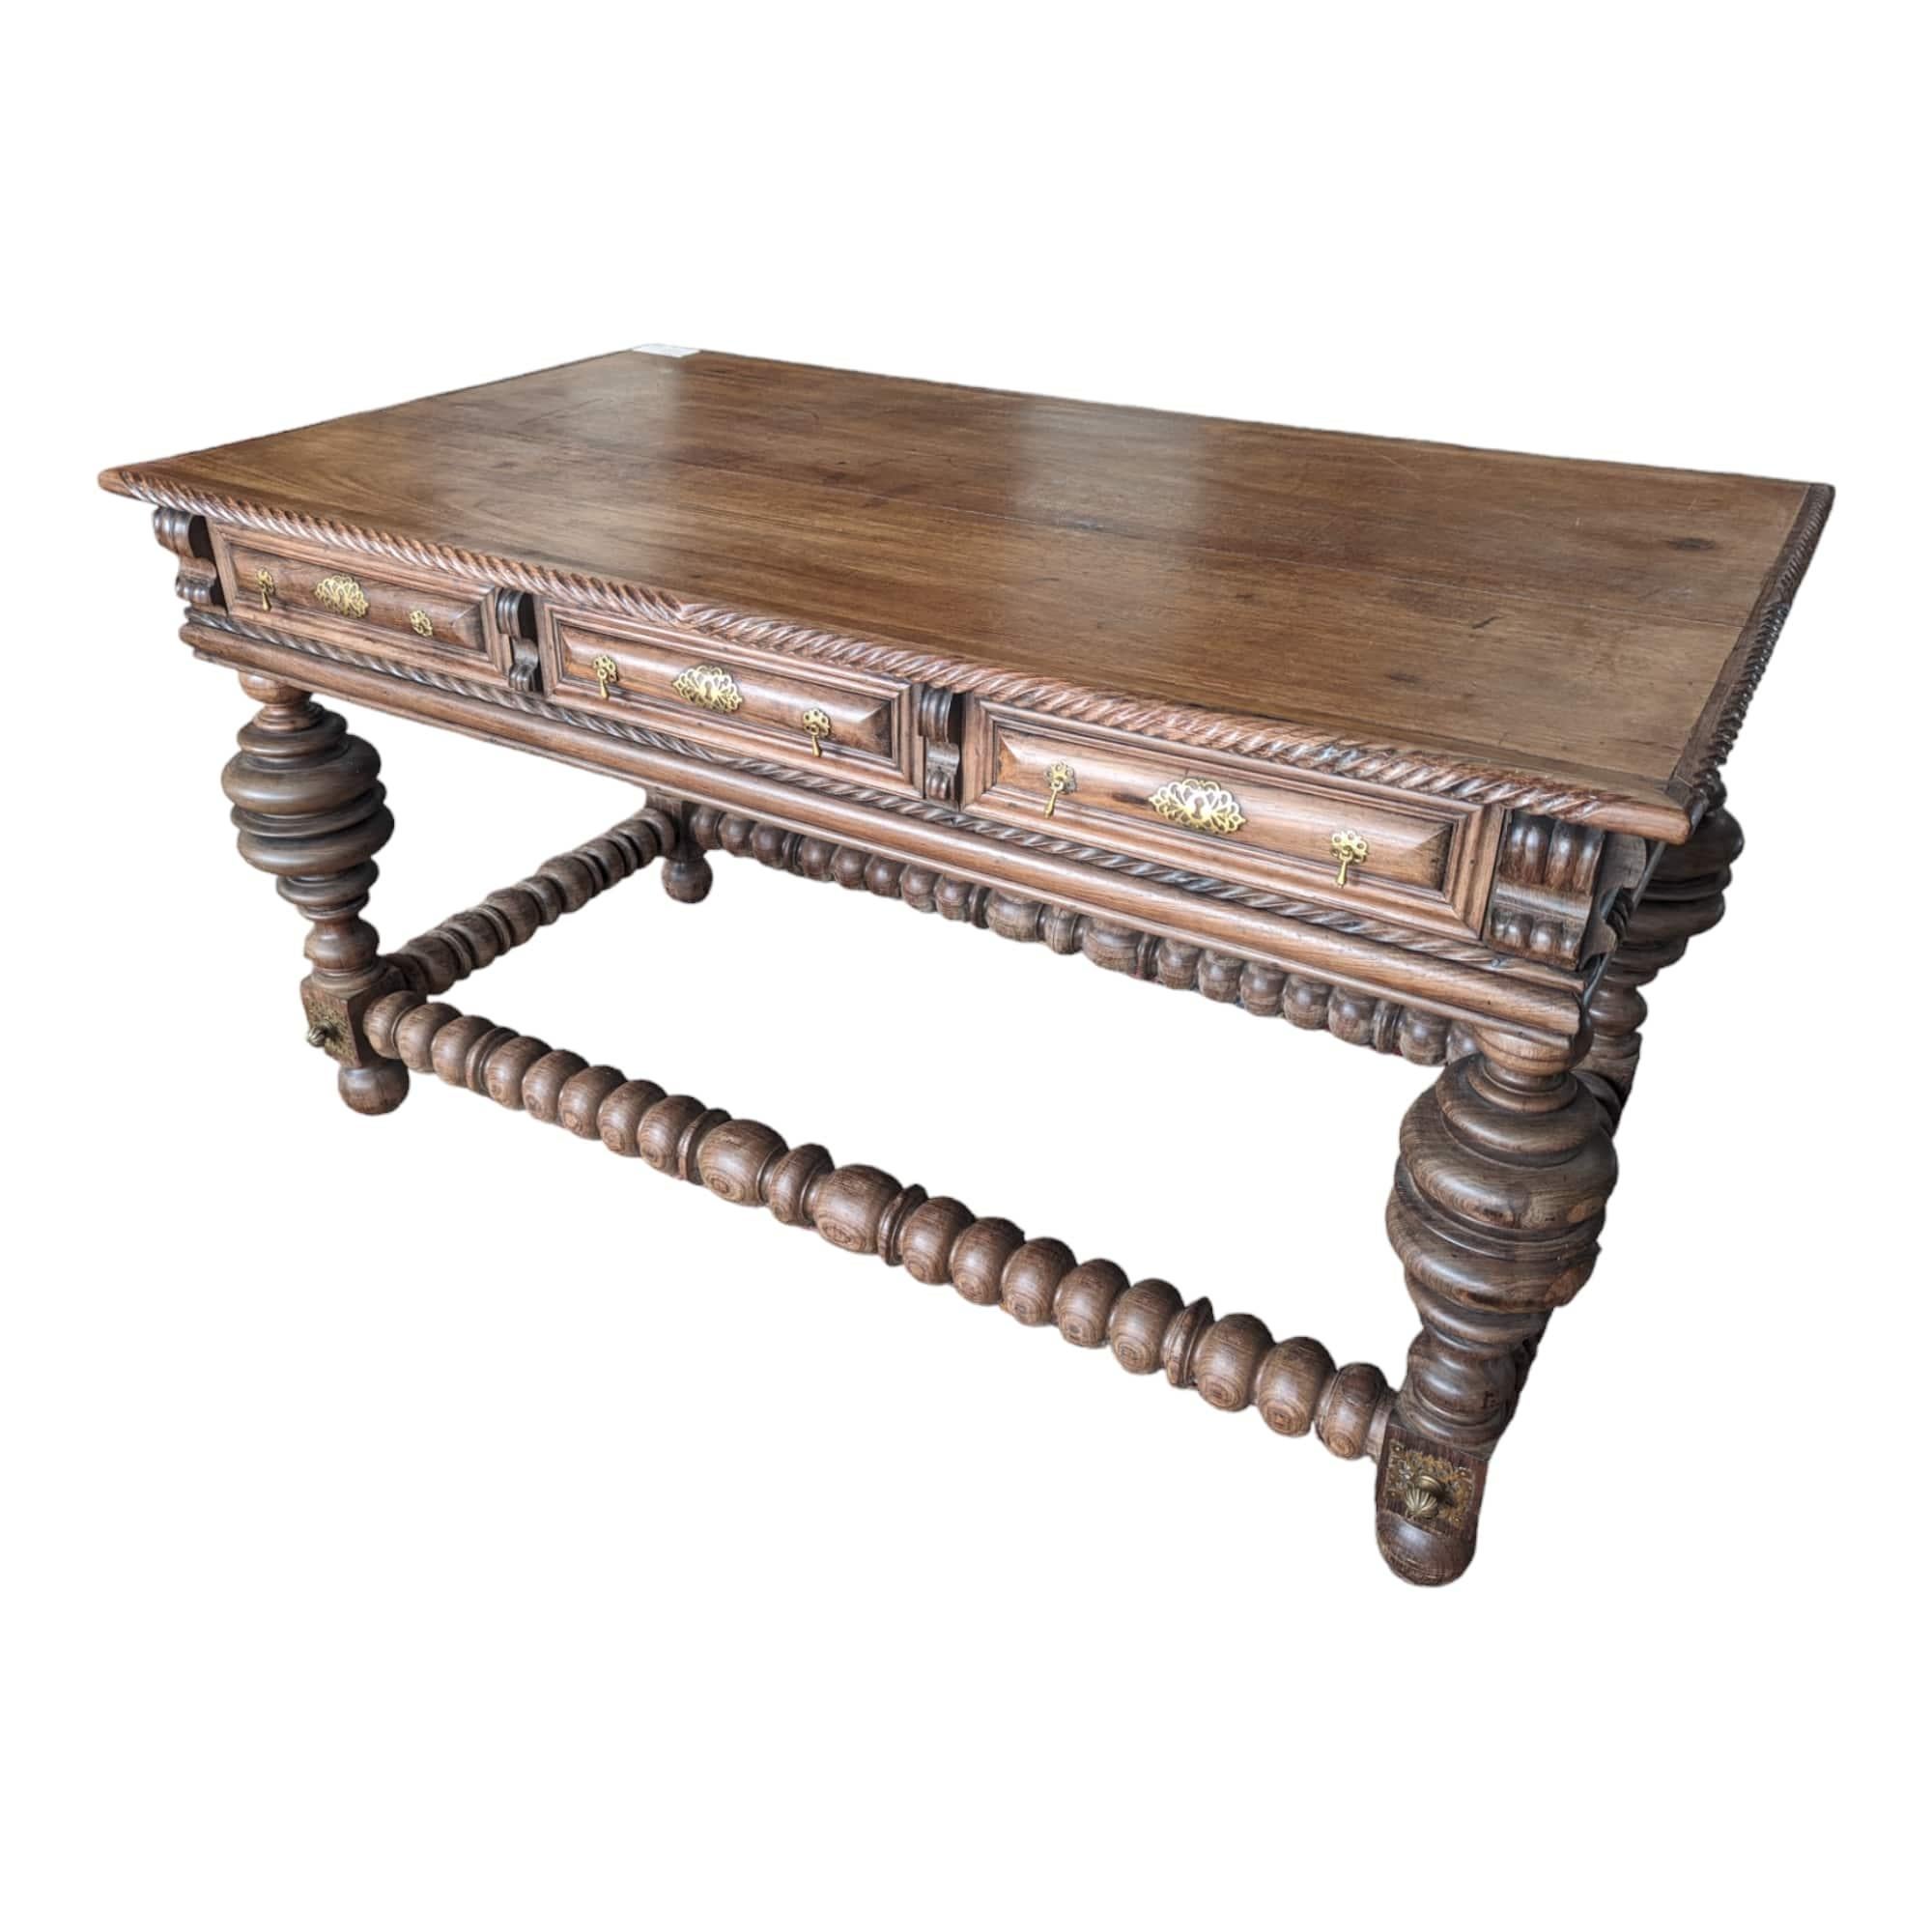 From Portugal. Immerse yourself in the opulence and charm of the Portuguese Baroque style with this remarkable table, dating from the 19th century. This exquisite piece is the result of a harmonious marriage of antique pieces, made with rosewood, a